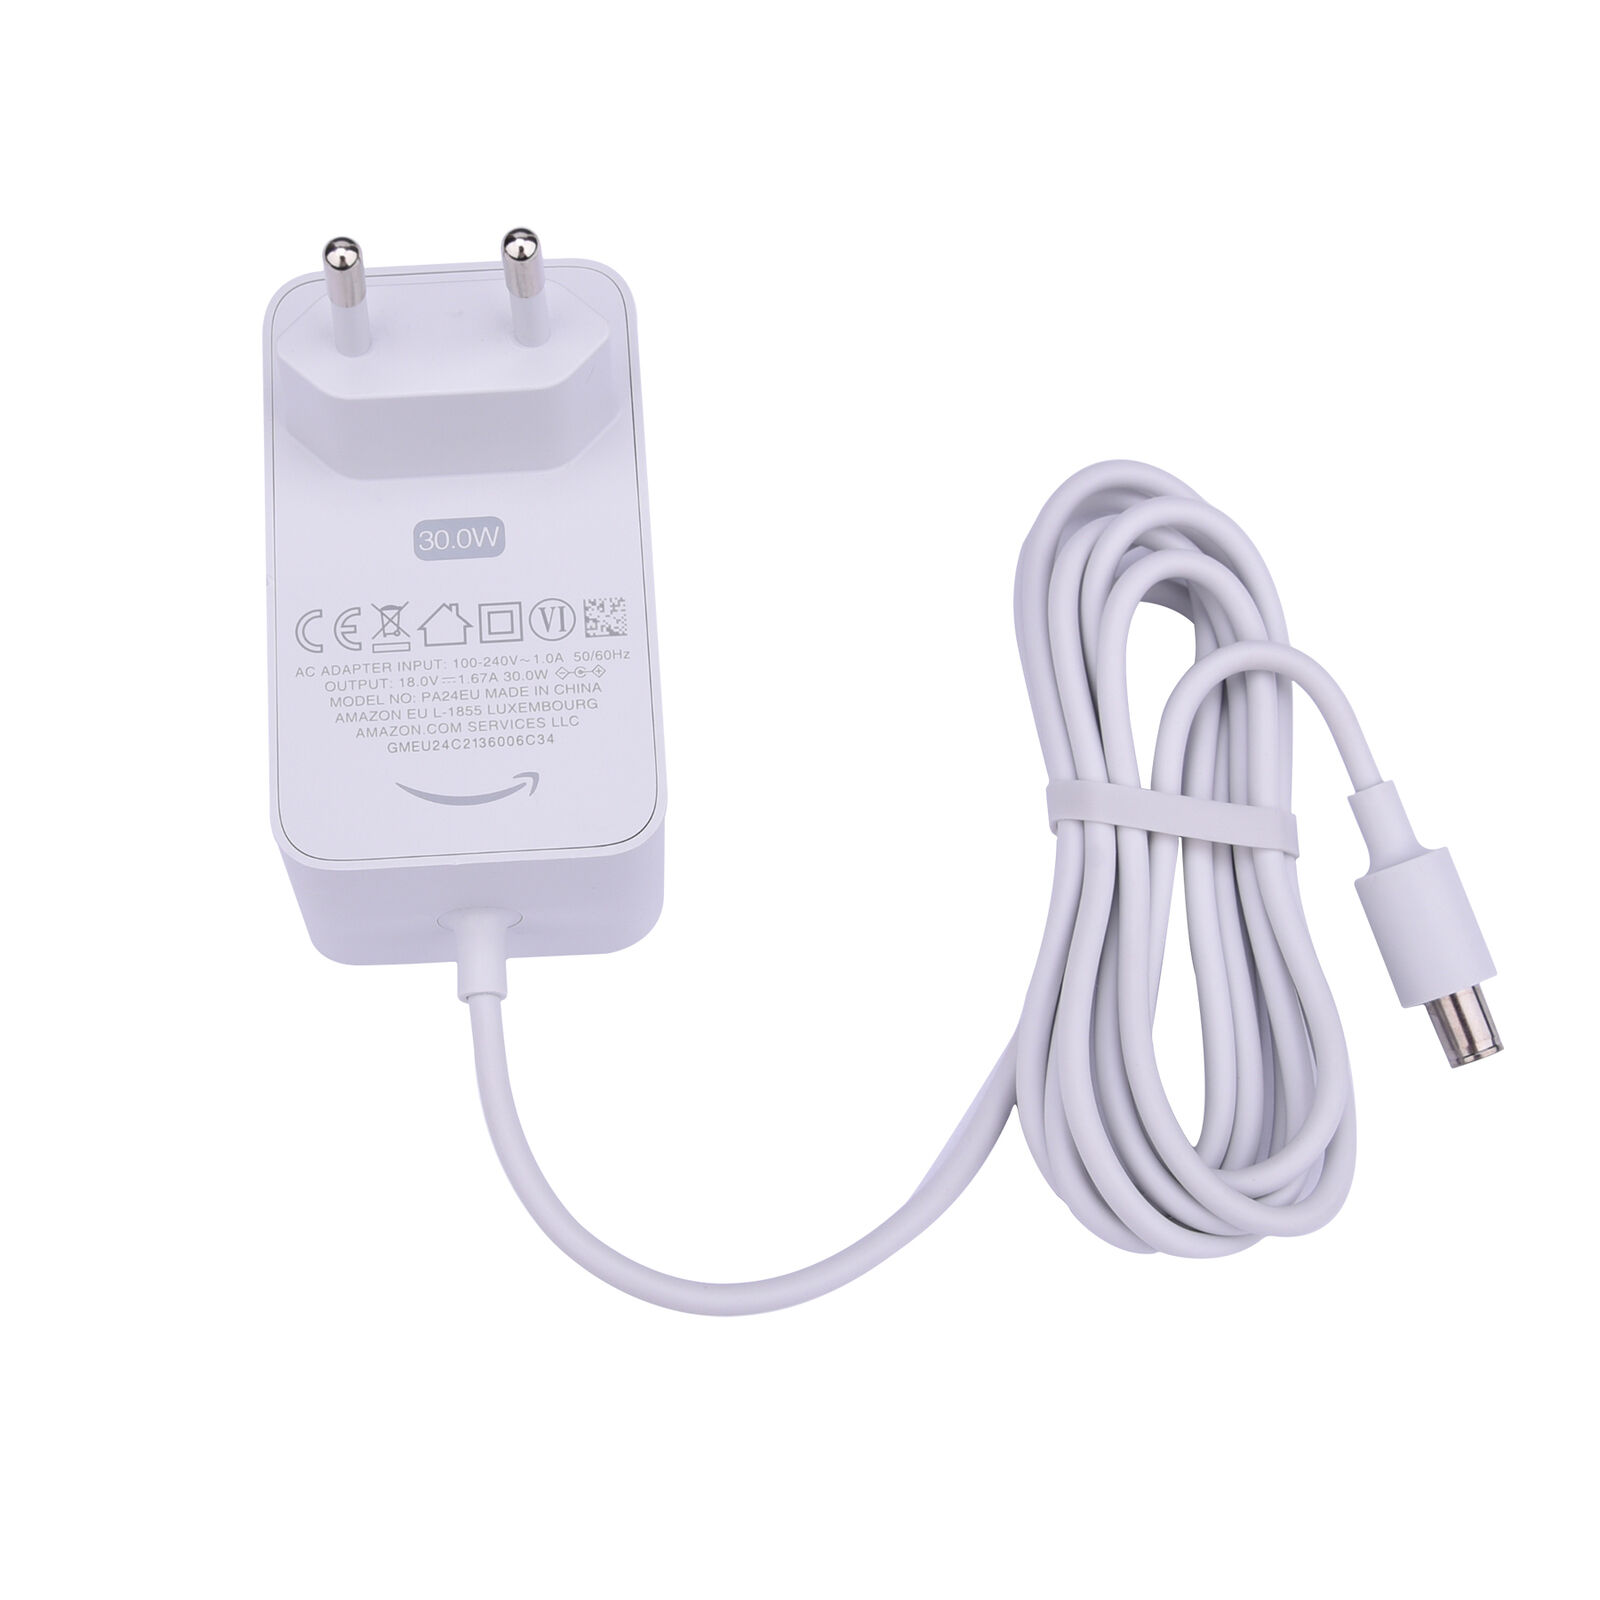 Amazon 30W power adapter for Amazon Amazon Echo Show (2nd gen) and Echo Show 8 Brand Amazon Color White Country/Region